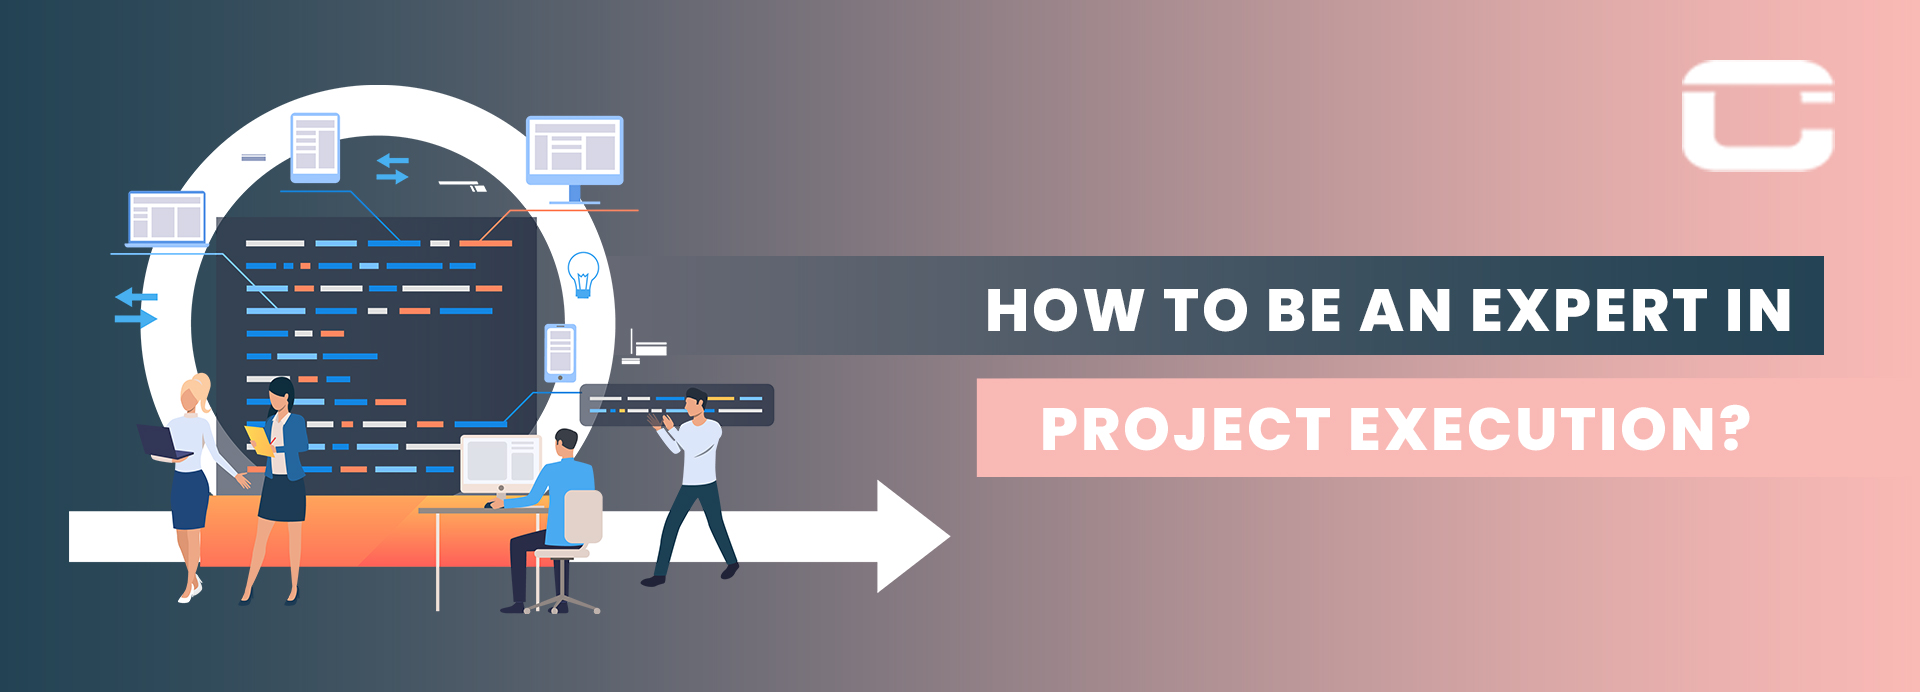 How to be an Expert in Project Execution?